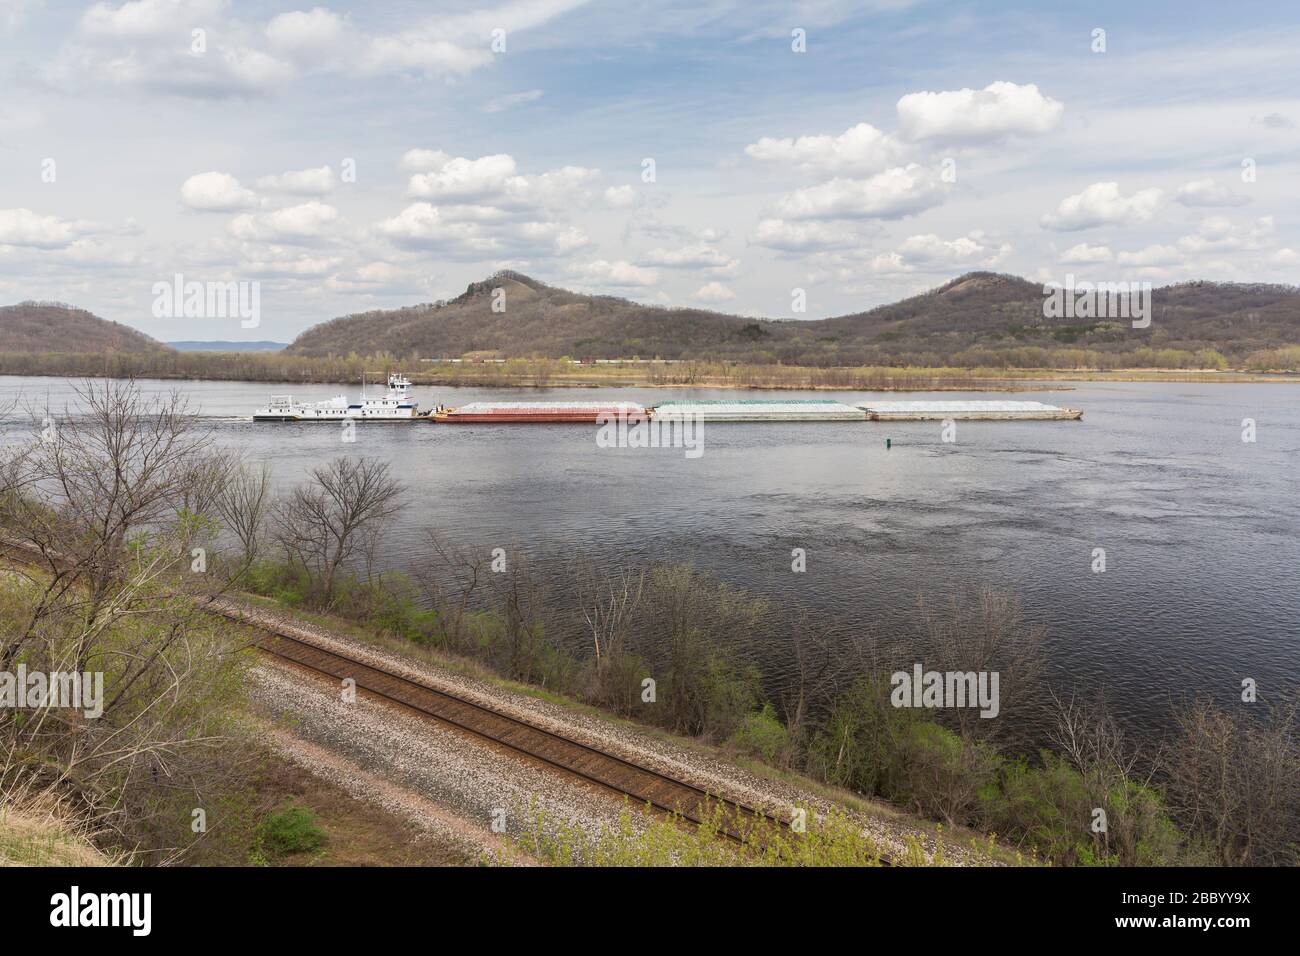 A barge on the Mississippi River during spring. Stock Photo